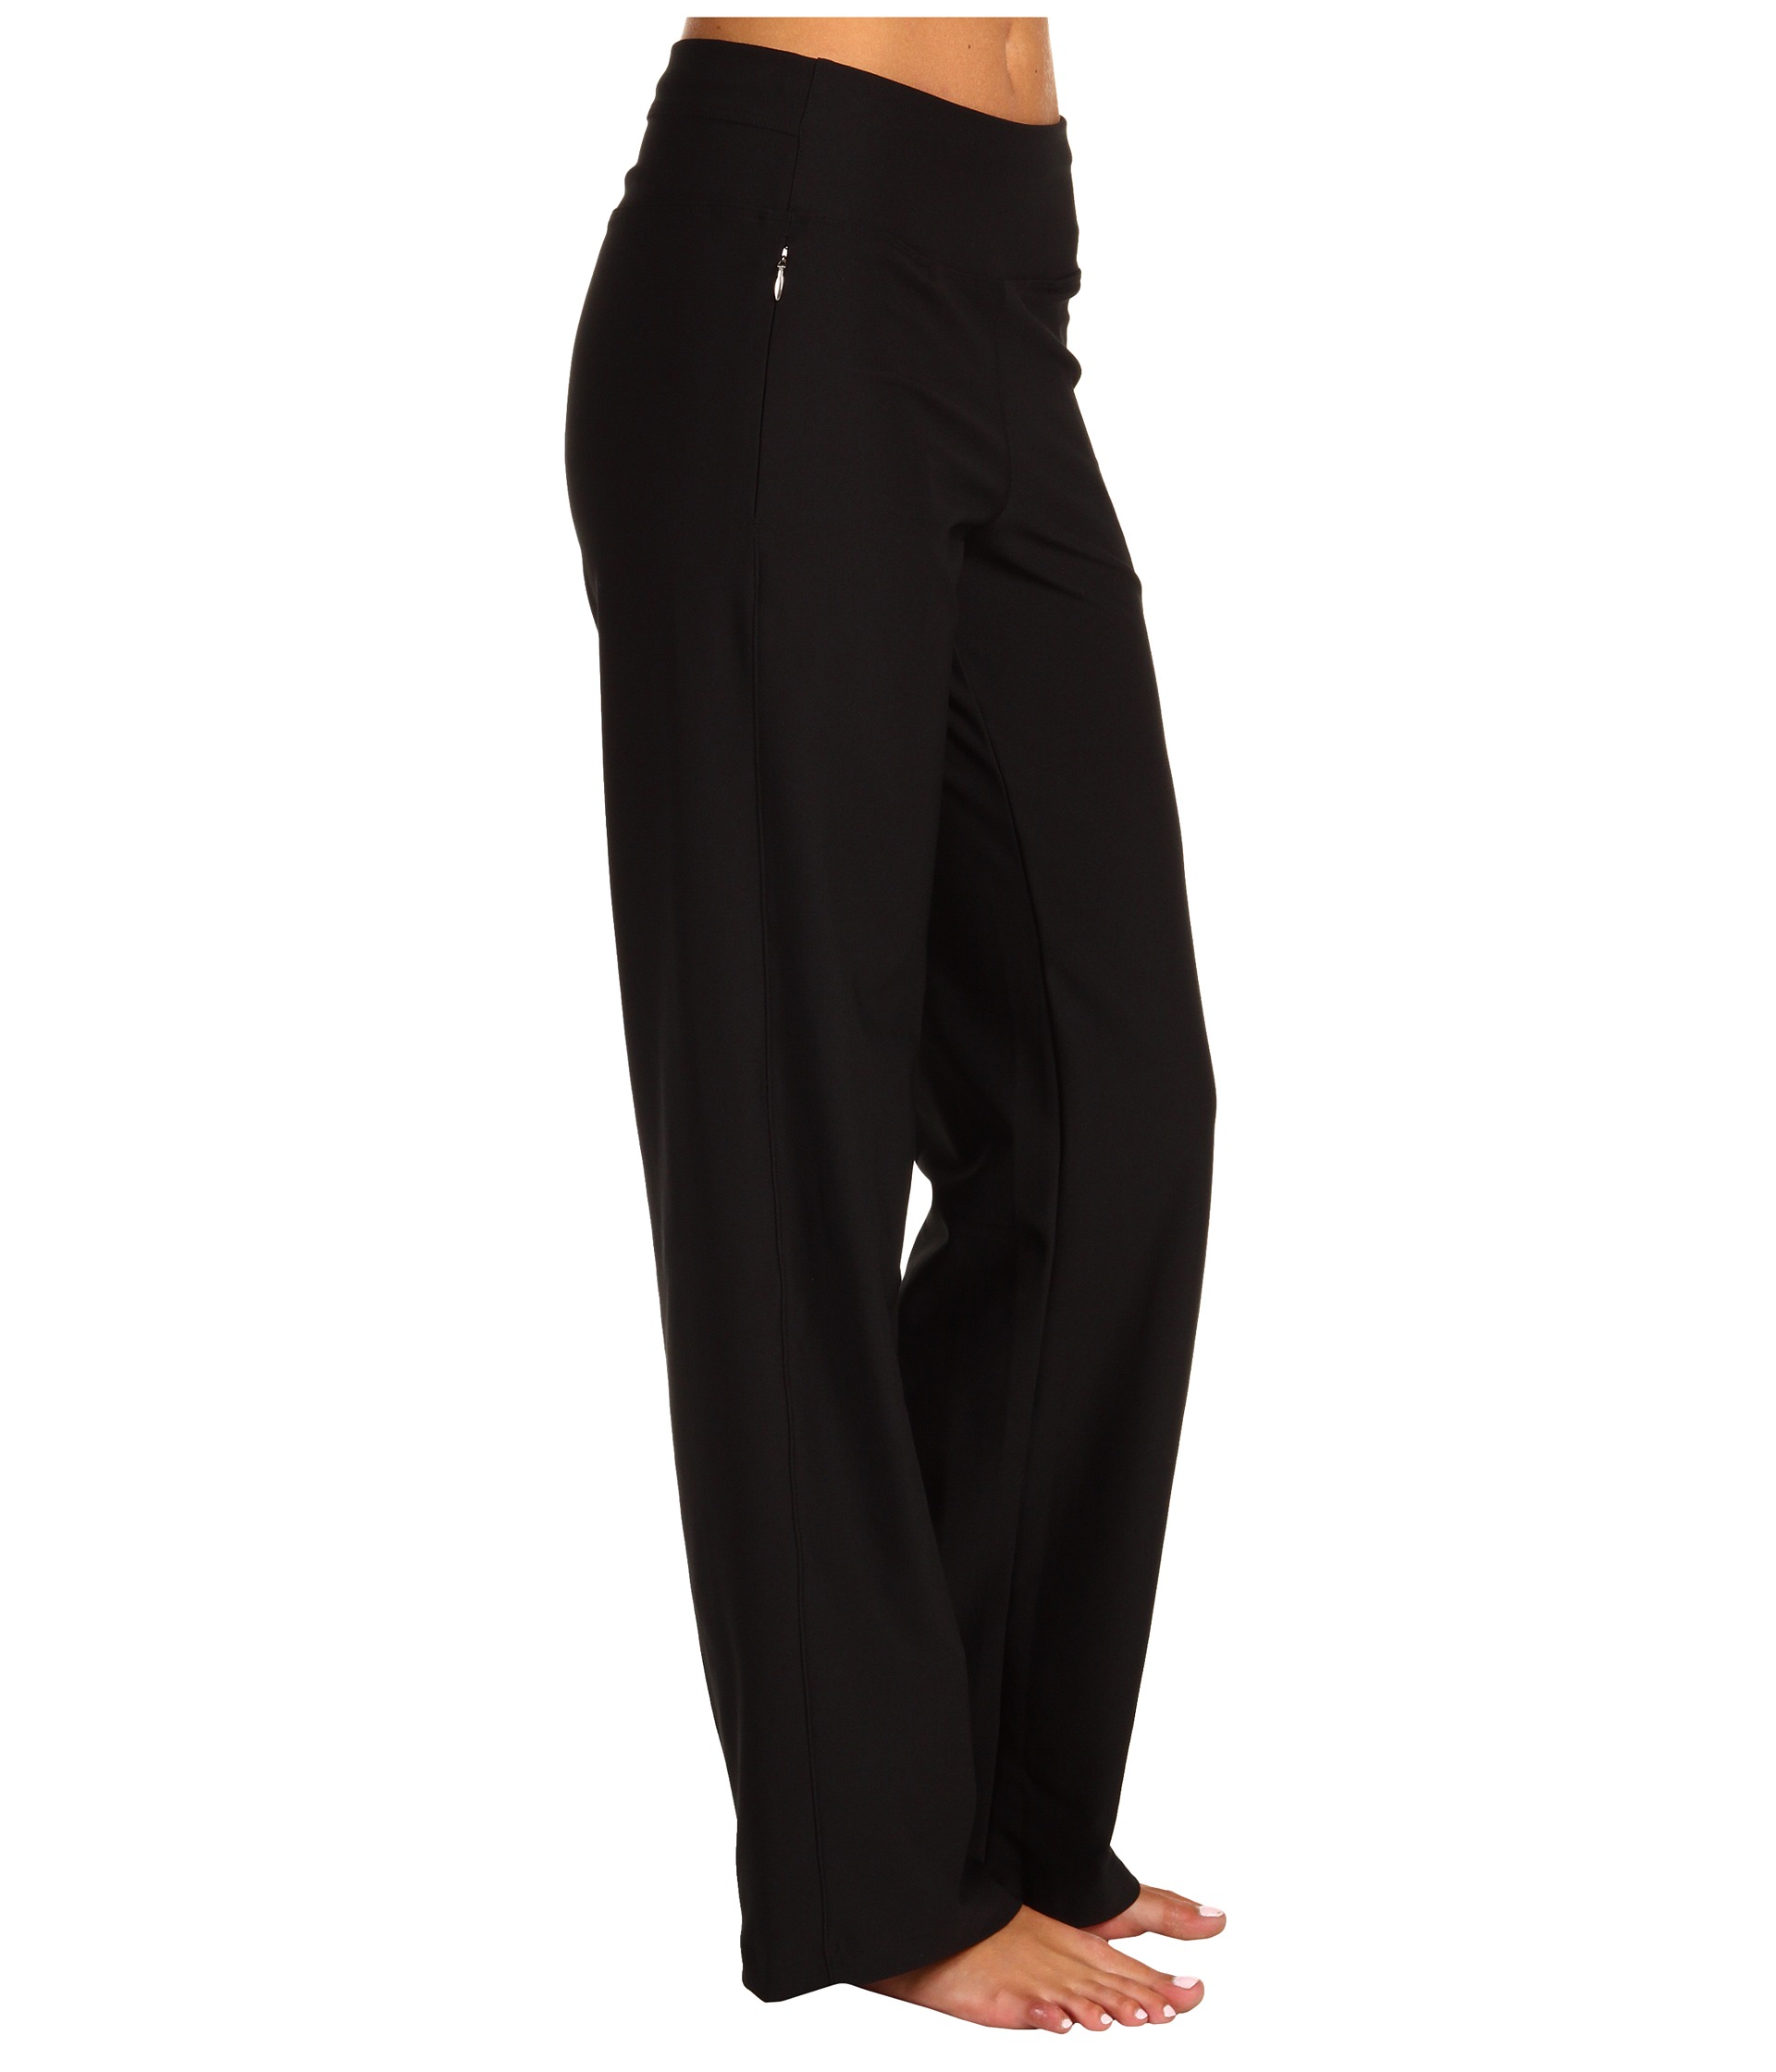 Lucy Everyday Pant II at Zappos.com